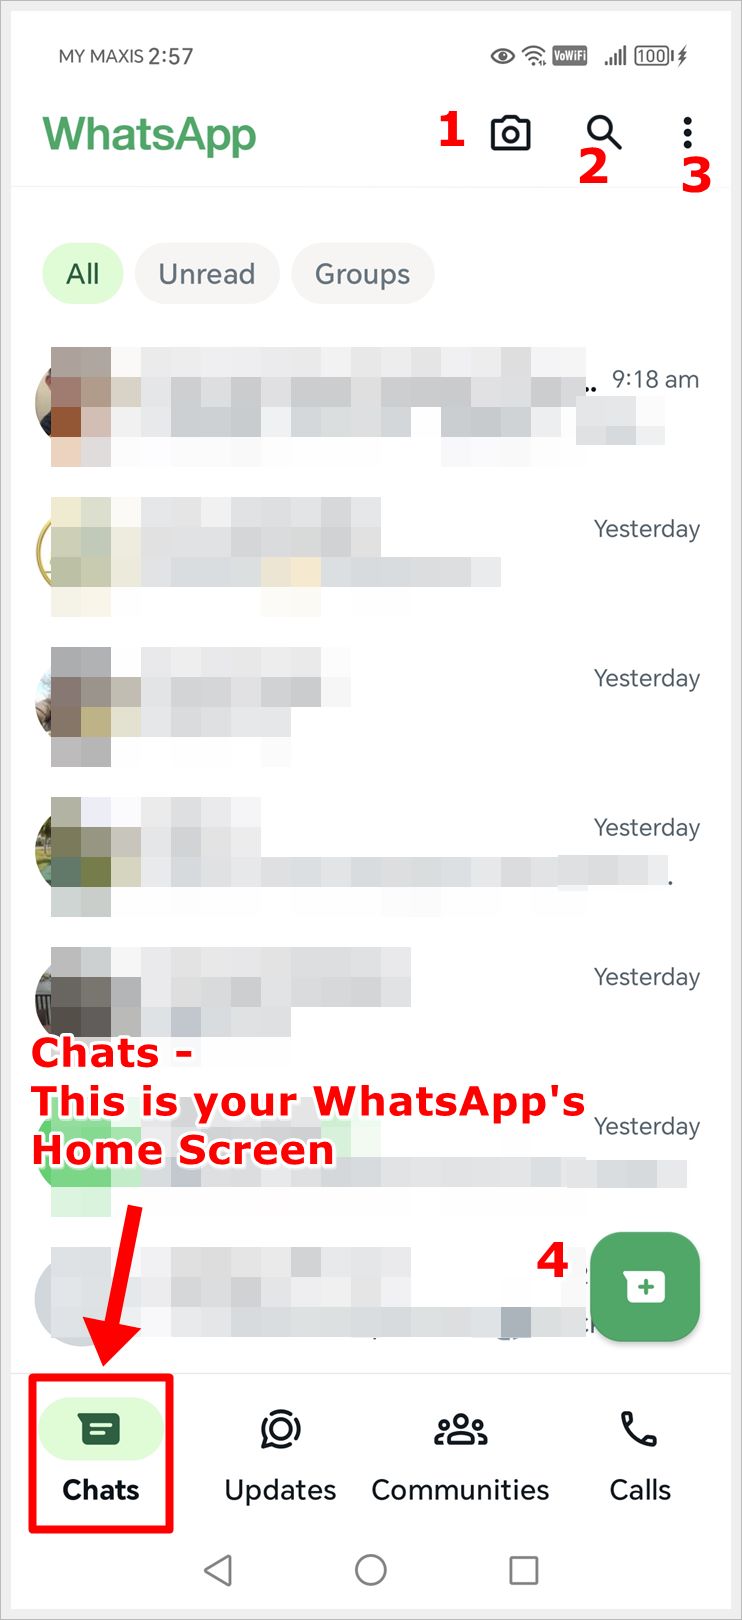 WhatsApp Home Screen (Represented by The "Chats" Tab) Symbols and Icons.